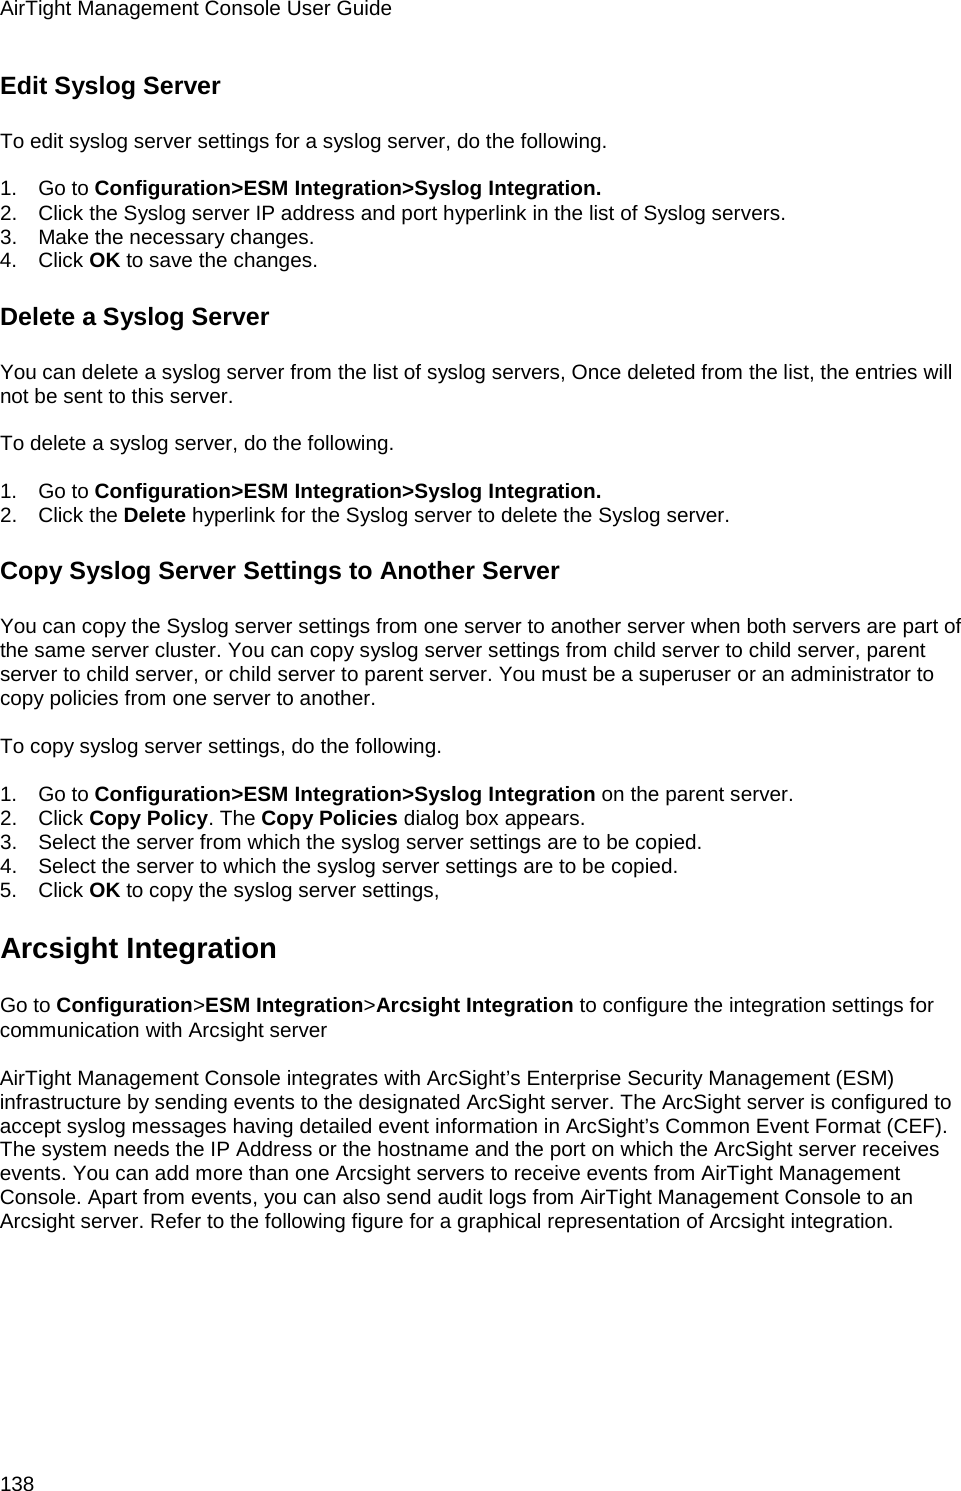 AirTight Management Console User Guide 138 Edit Syslog Server To edit syslog server settings for a syslog server, do the following.   1.      Go to Configuration&gt;ESM Integration&gt;Syslog Integration. 2.      Click the Syslog server IP address and port hyperlink in the list of Syslog servers.  3.      Make the necessary changes.  4.      Click OK to save the changes. Delete a Syslog Server You can delete a syslog server from the list of syslog servers, Once deleted from the list, the entries will not be sent to this server.   To delete a syslog server, do the following.   1.      Go to Configuration&gt;ESM Integration&gt;Syslog Integration. 2.      Click the Delete hyperlink for the Syslog server to delete the Syslog server.  Copy Syslog Server Settings to Another Server You can copy the Syslog server settings from one server to another server when both servers are part of the same server cluster. You can copy syslog server settings from child server to child server, parent server to child server, or child server to parent server. You must be a superuser or an administrator to copy policies from one server to another.   To copy syslog server settings, do the following.   1.      Go to Configuration&gt;ESM Integration&gt;Syslog Integration on the parent server. 2.      Click Copy Policy. The Copy Policies dialog box appears. 3.      Select the server from which the syslog server settings are to be copied. 4.      Select the server to which the syslog server settings are to be copied. 5.      Click OK to copy the syslog server settings, Arcsight Integration Go to Configuration&gt;ESM Integration&gt;Arcsight Integration to configure the integration settings for communication with Arcsight server   AirTight Management Console integrates with ArcSight’s Enterprise Security Management (ESM) infrastructure by sending events to the designated ArcSight server. The ArcSight server is configured to accept syslog messages having detailed event information in ArcSight’s Common Event Format (CEF). The system needs the IP Address or the hostname and the port on which the ArcSight server receives events. You can add more than one Arcsight servers to receive events from AirTight Management Console. Apart from events, you can also send audit logs from AirTight Management Console to an Arcsight server. Refer to the following figure for a graphical representation of Arcsight integration.   